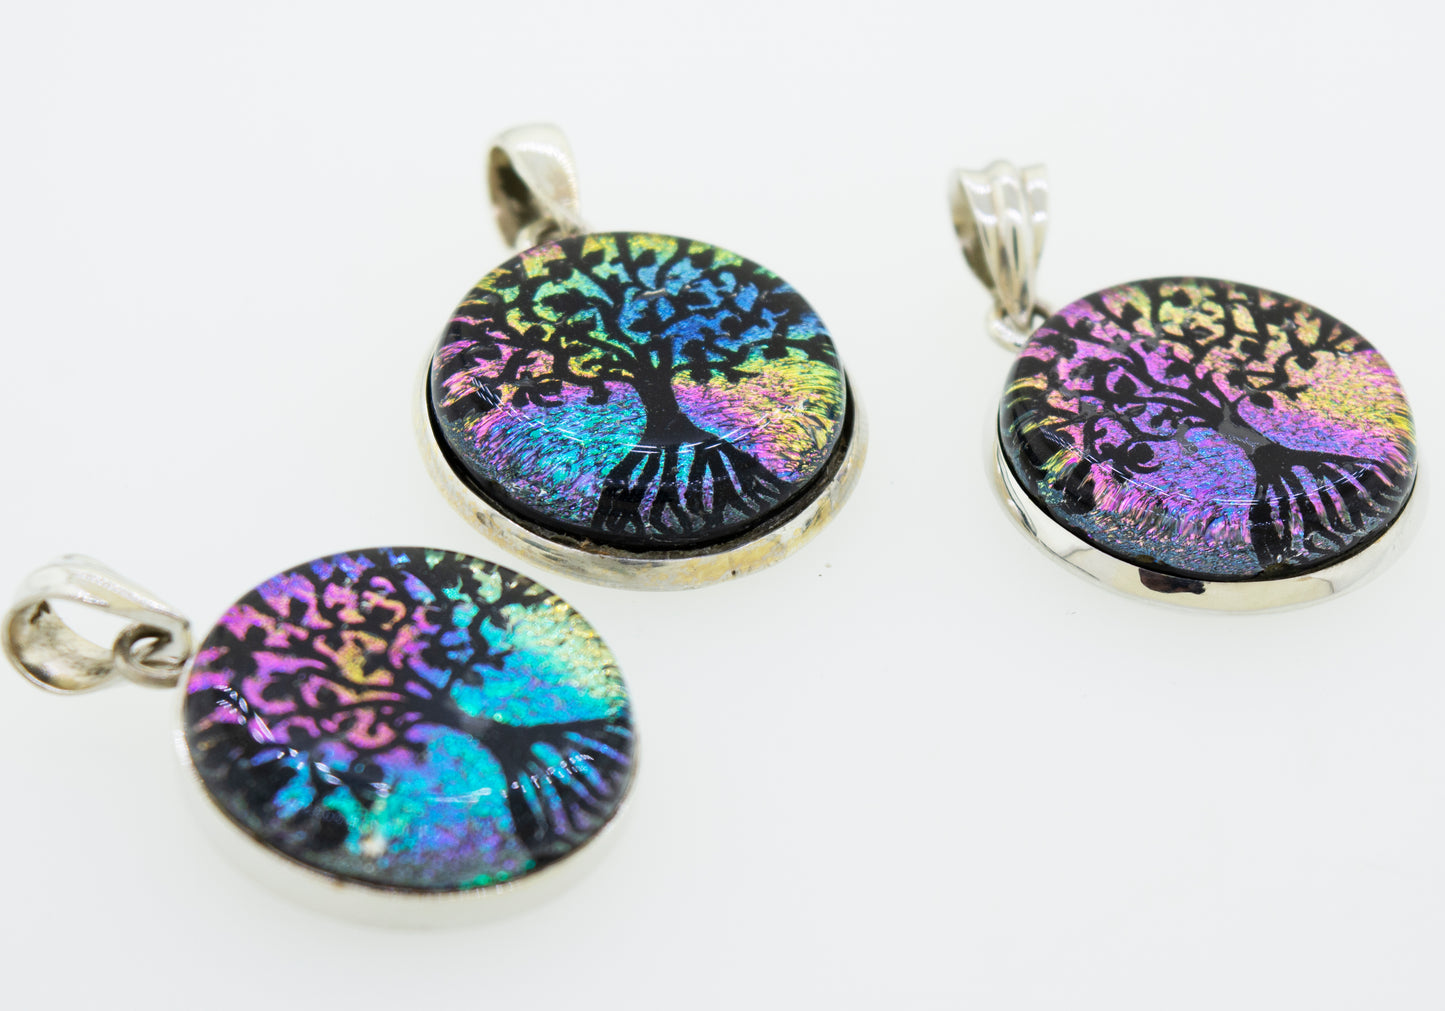 Three vibrant Super Silver Dichroic Glass Tree Of Life pendants on a white surface.